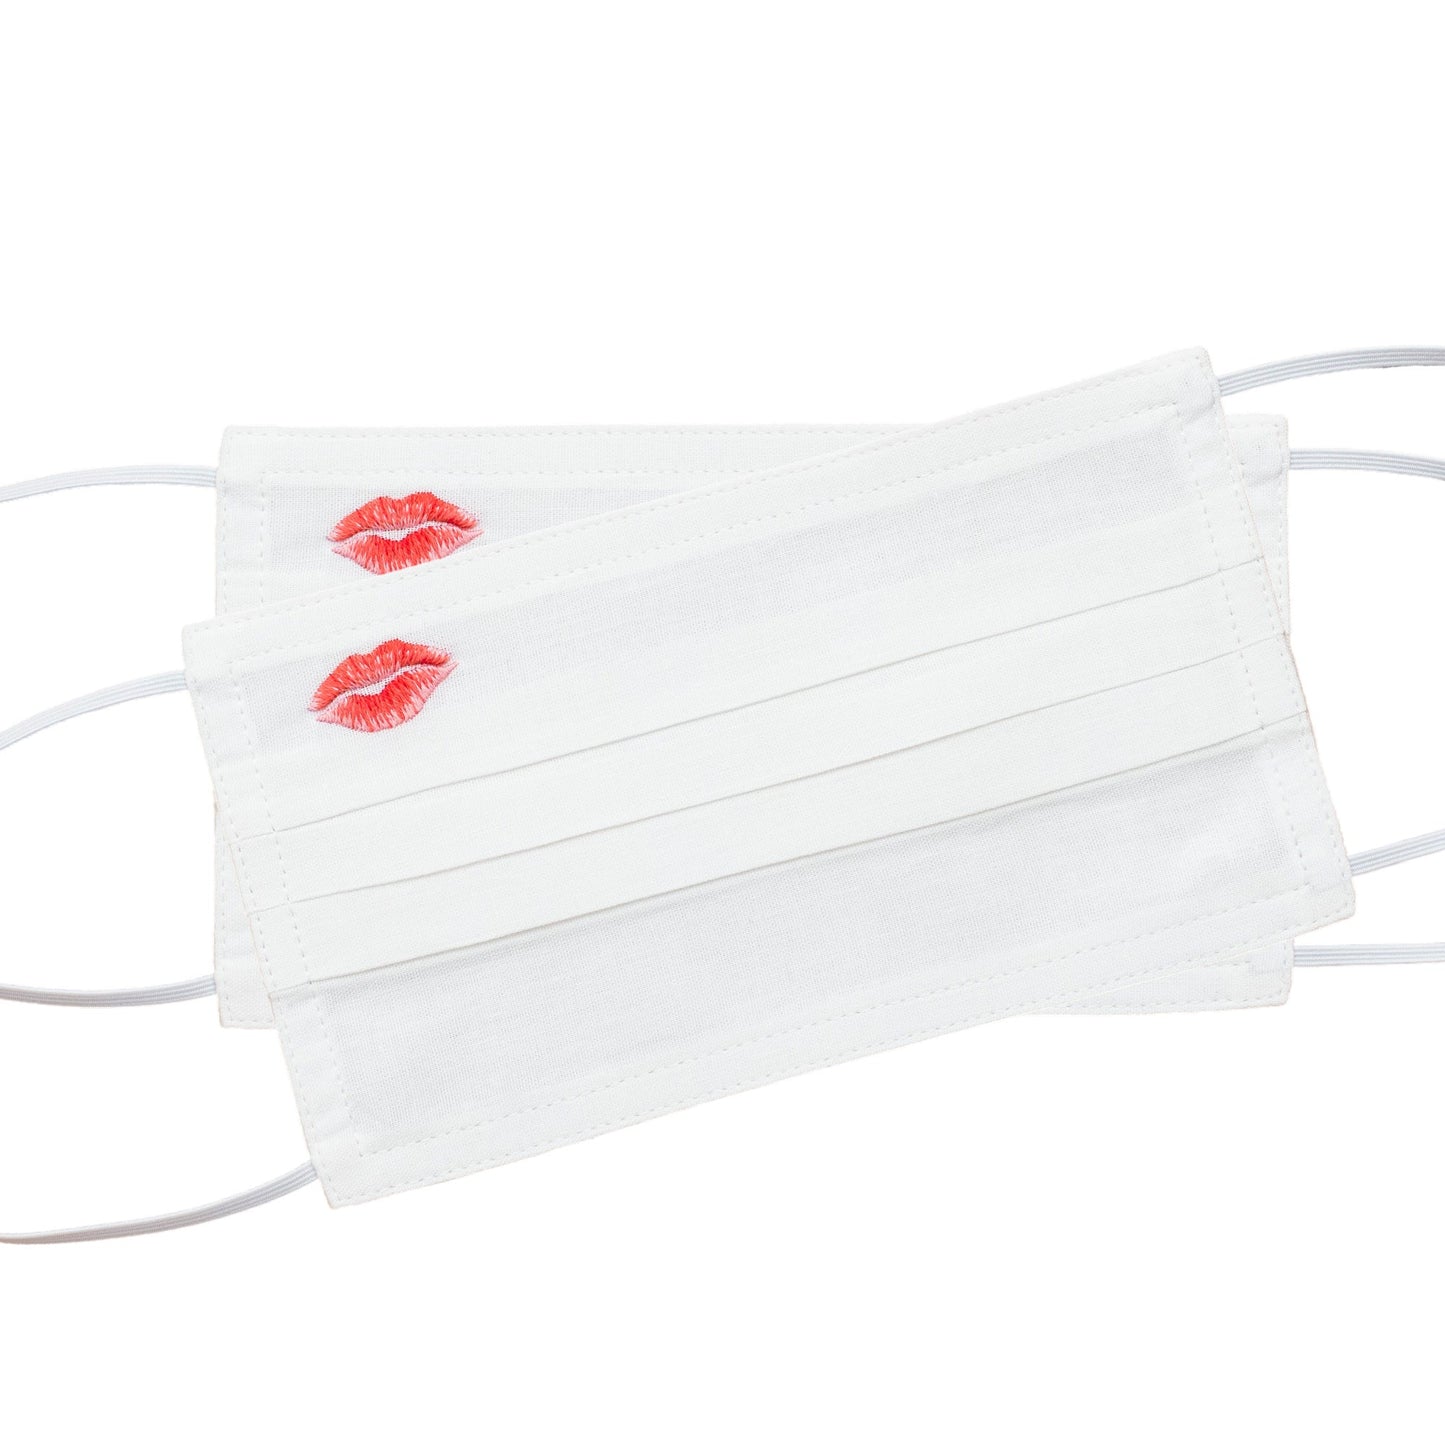 Two white face masks with red & pink lipstick kiss marks in the top left corner of each